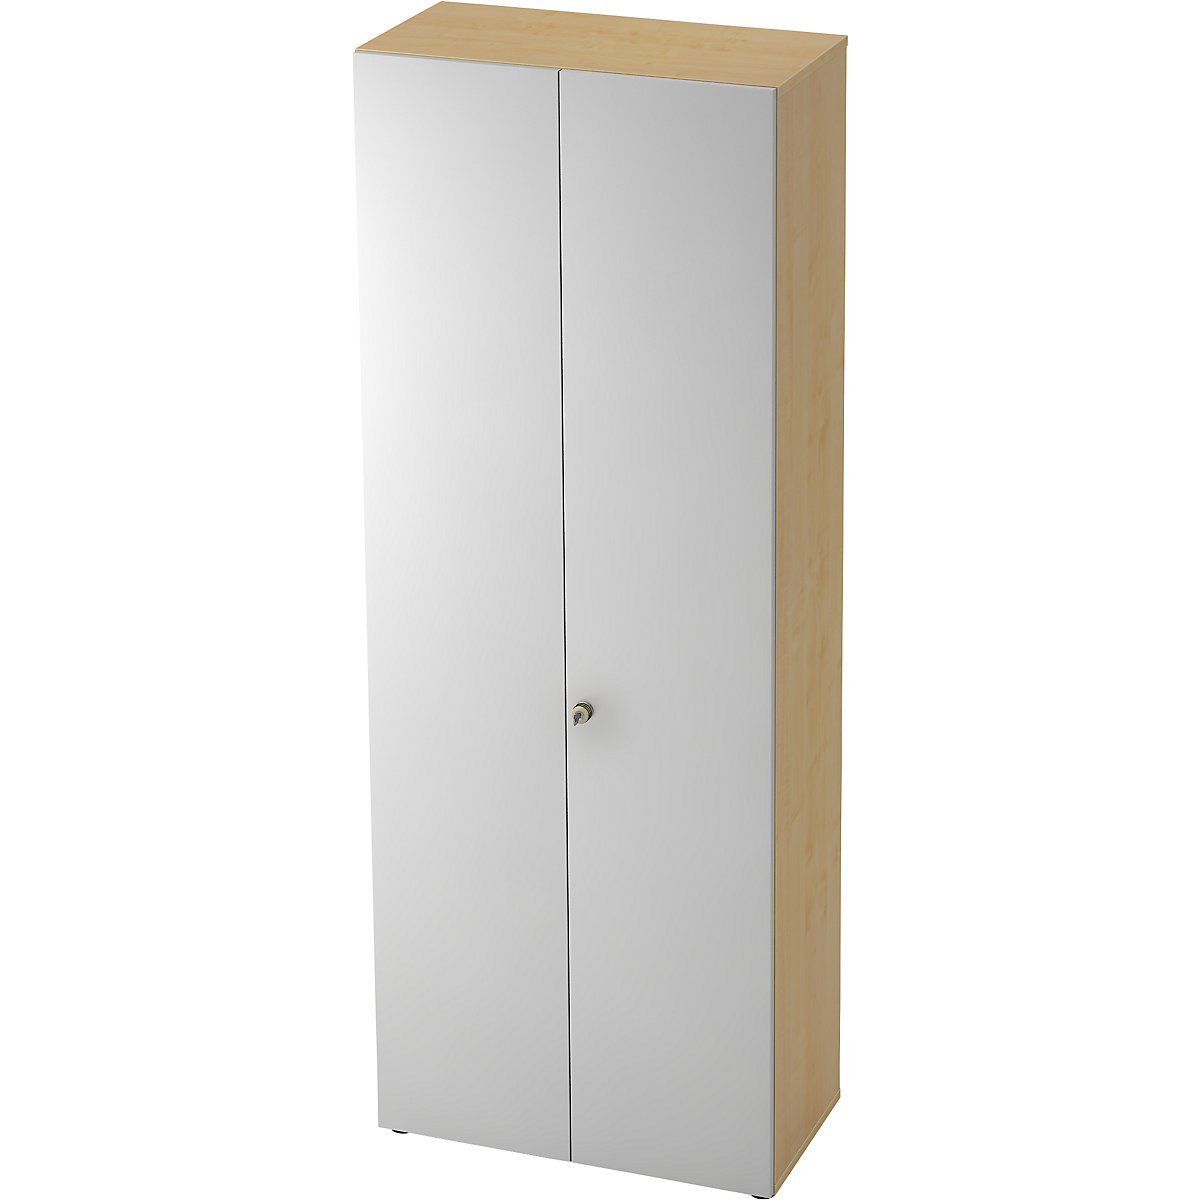 Cloakroom locker with acoustic rear panel ANNY-AC, 2 shelves, 1 clothes rail, maple finish-8